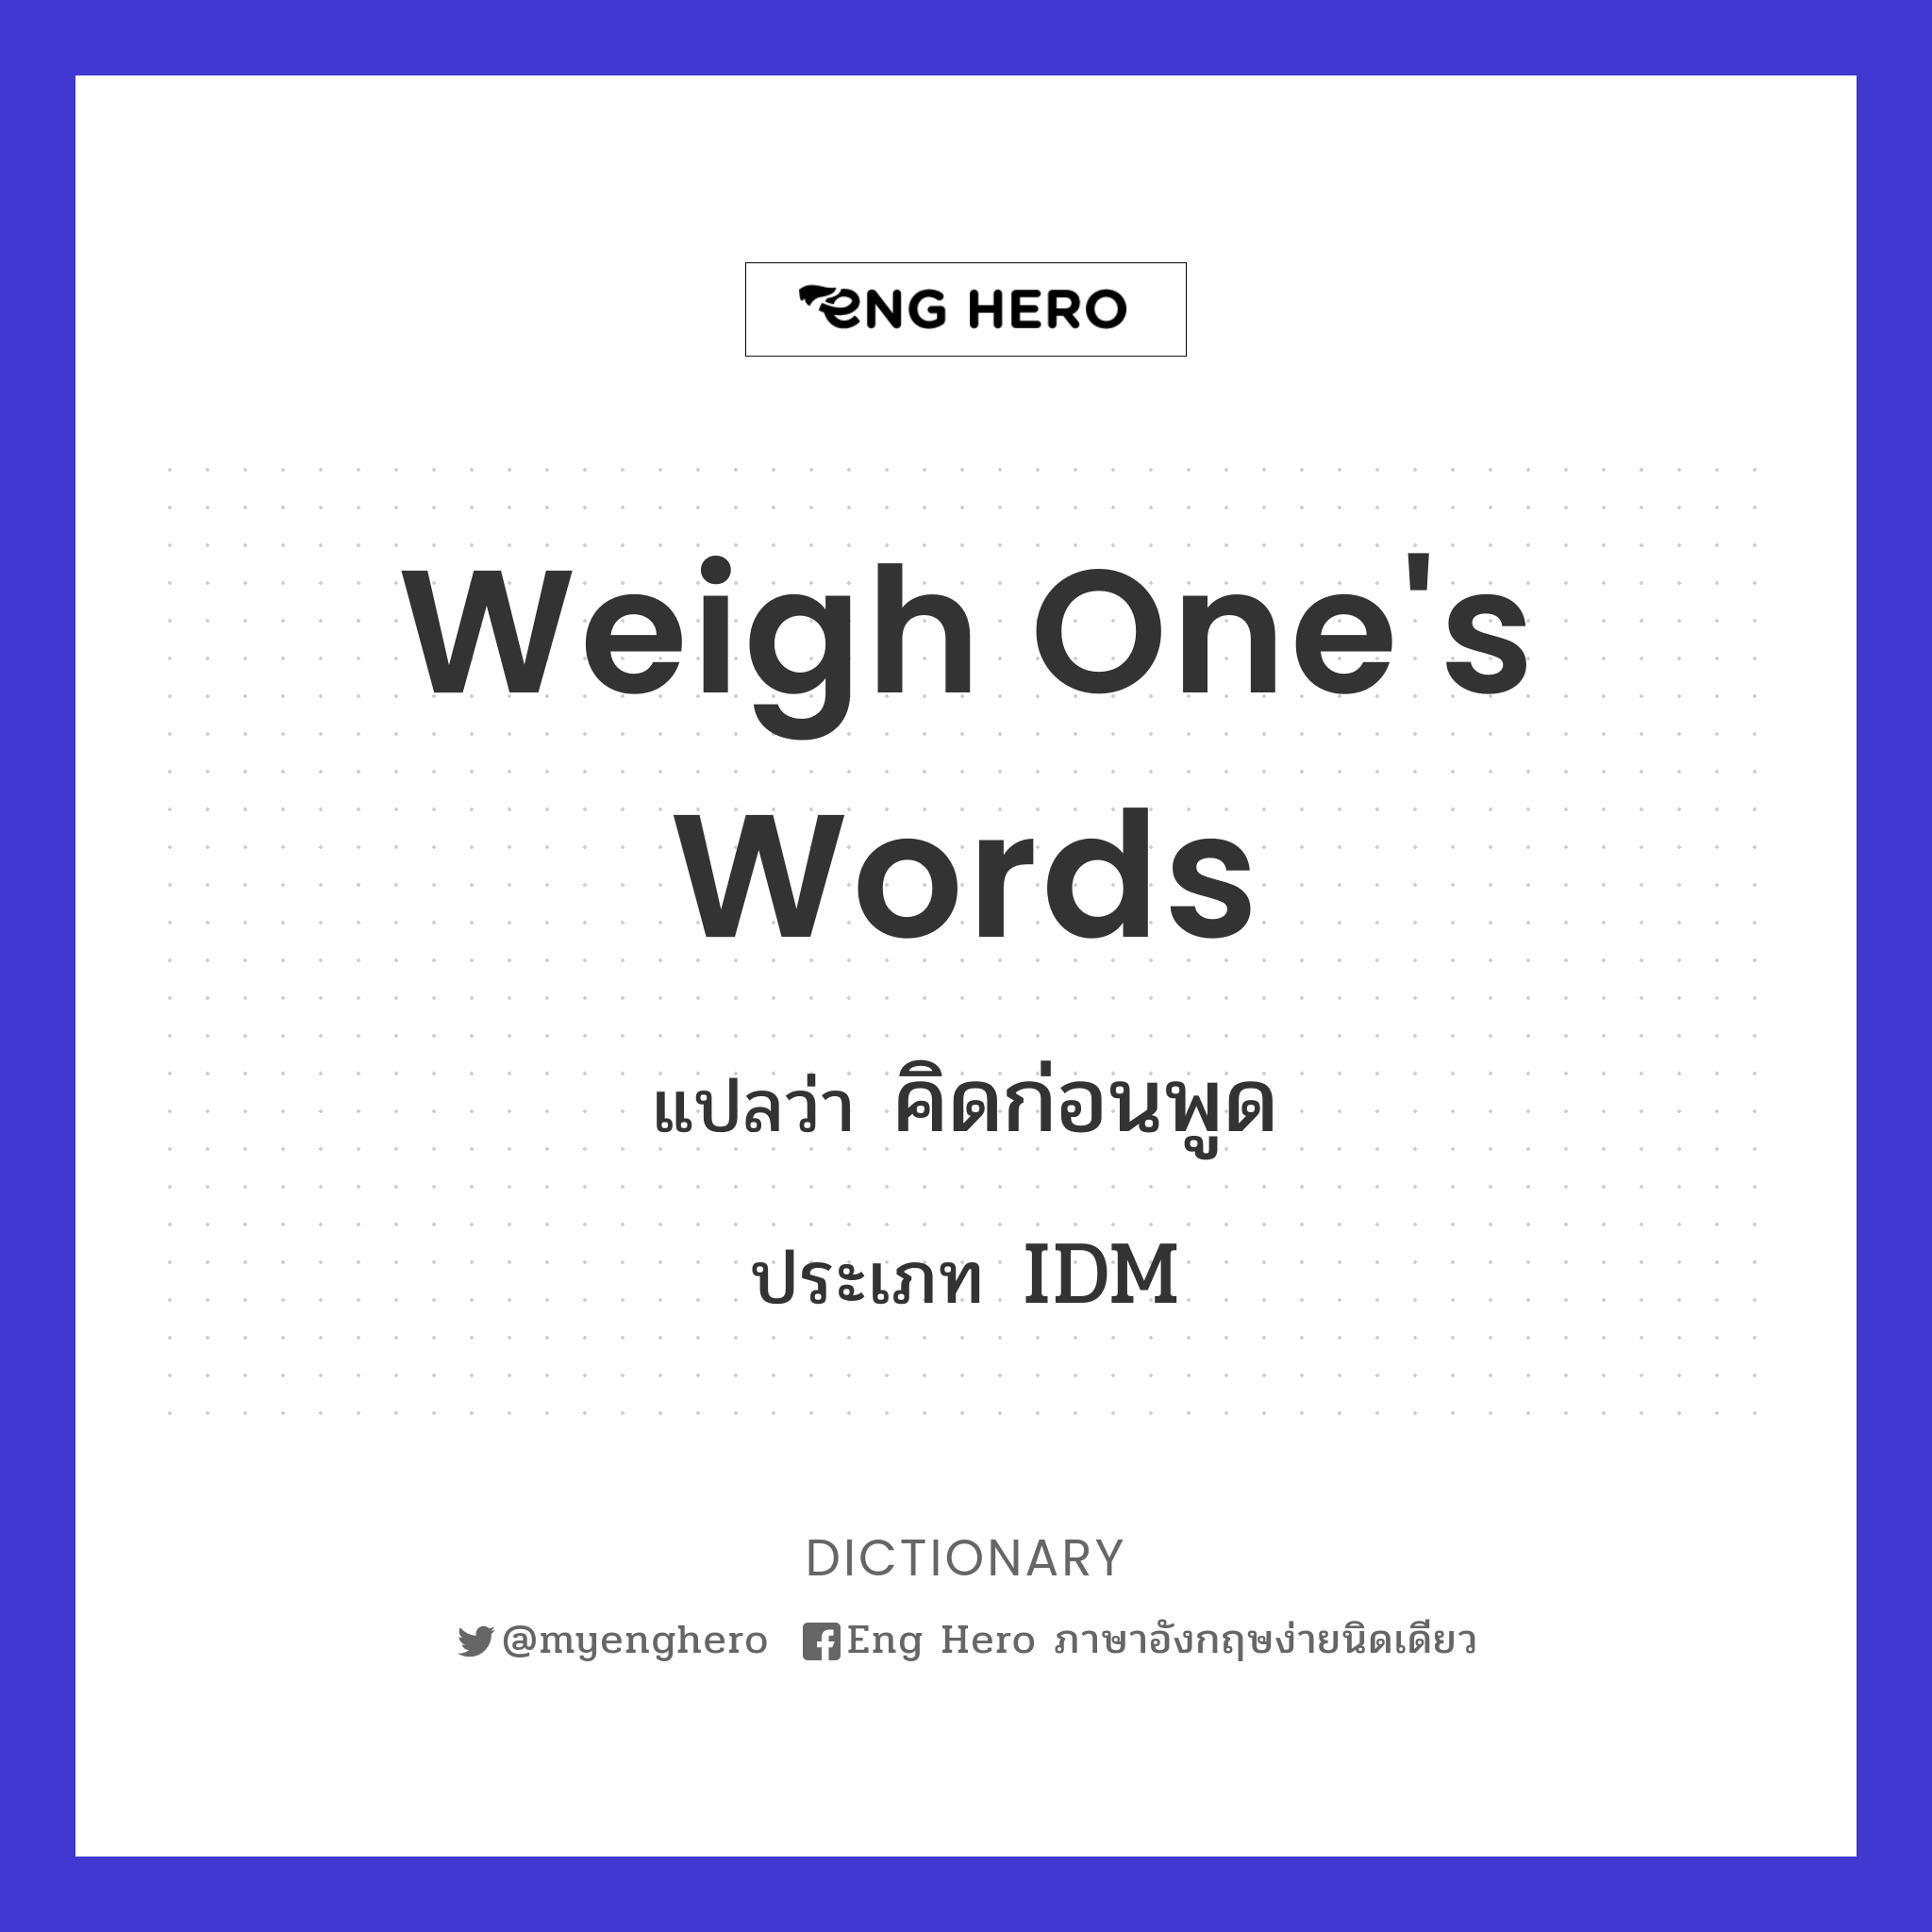 weigh one's words